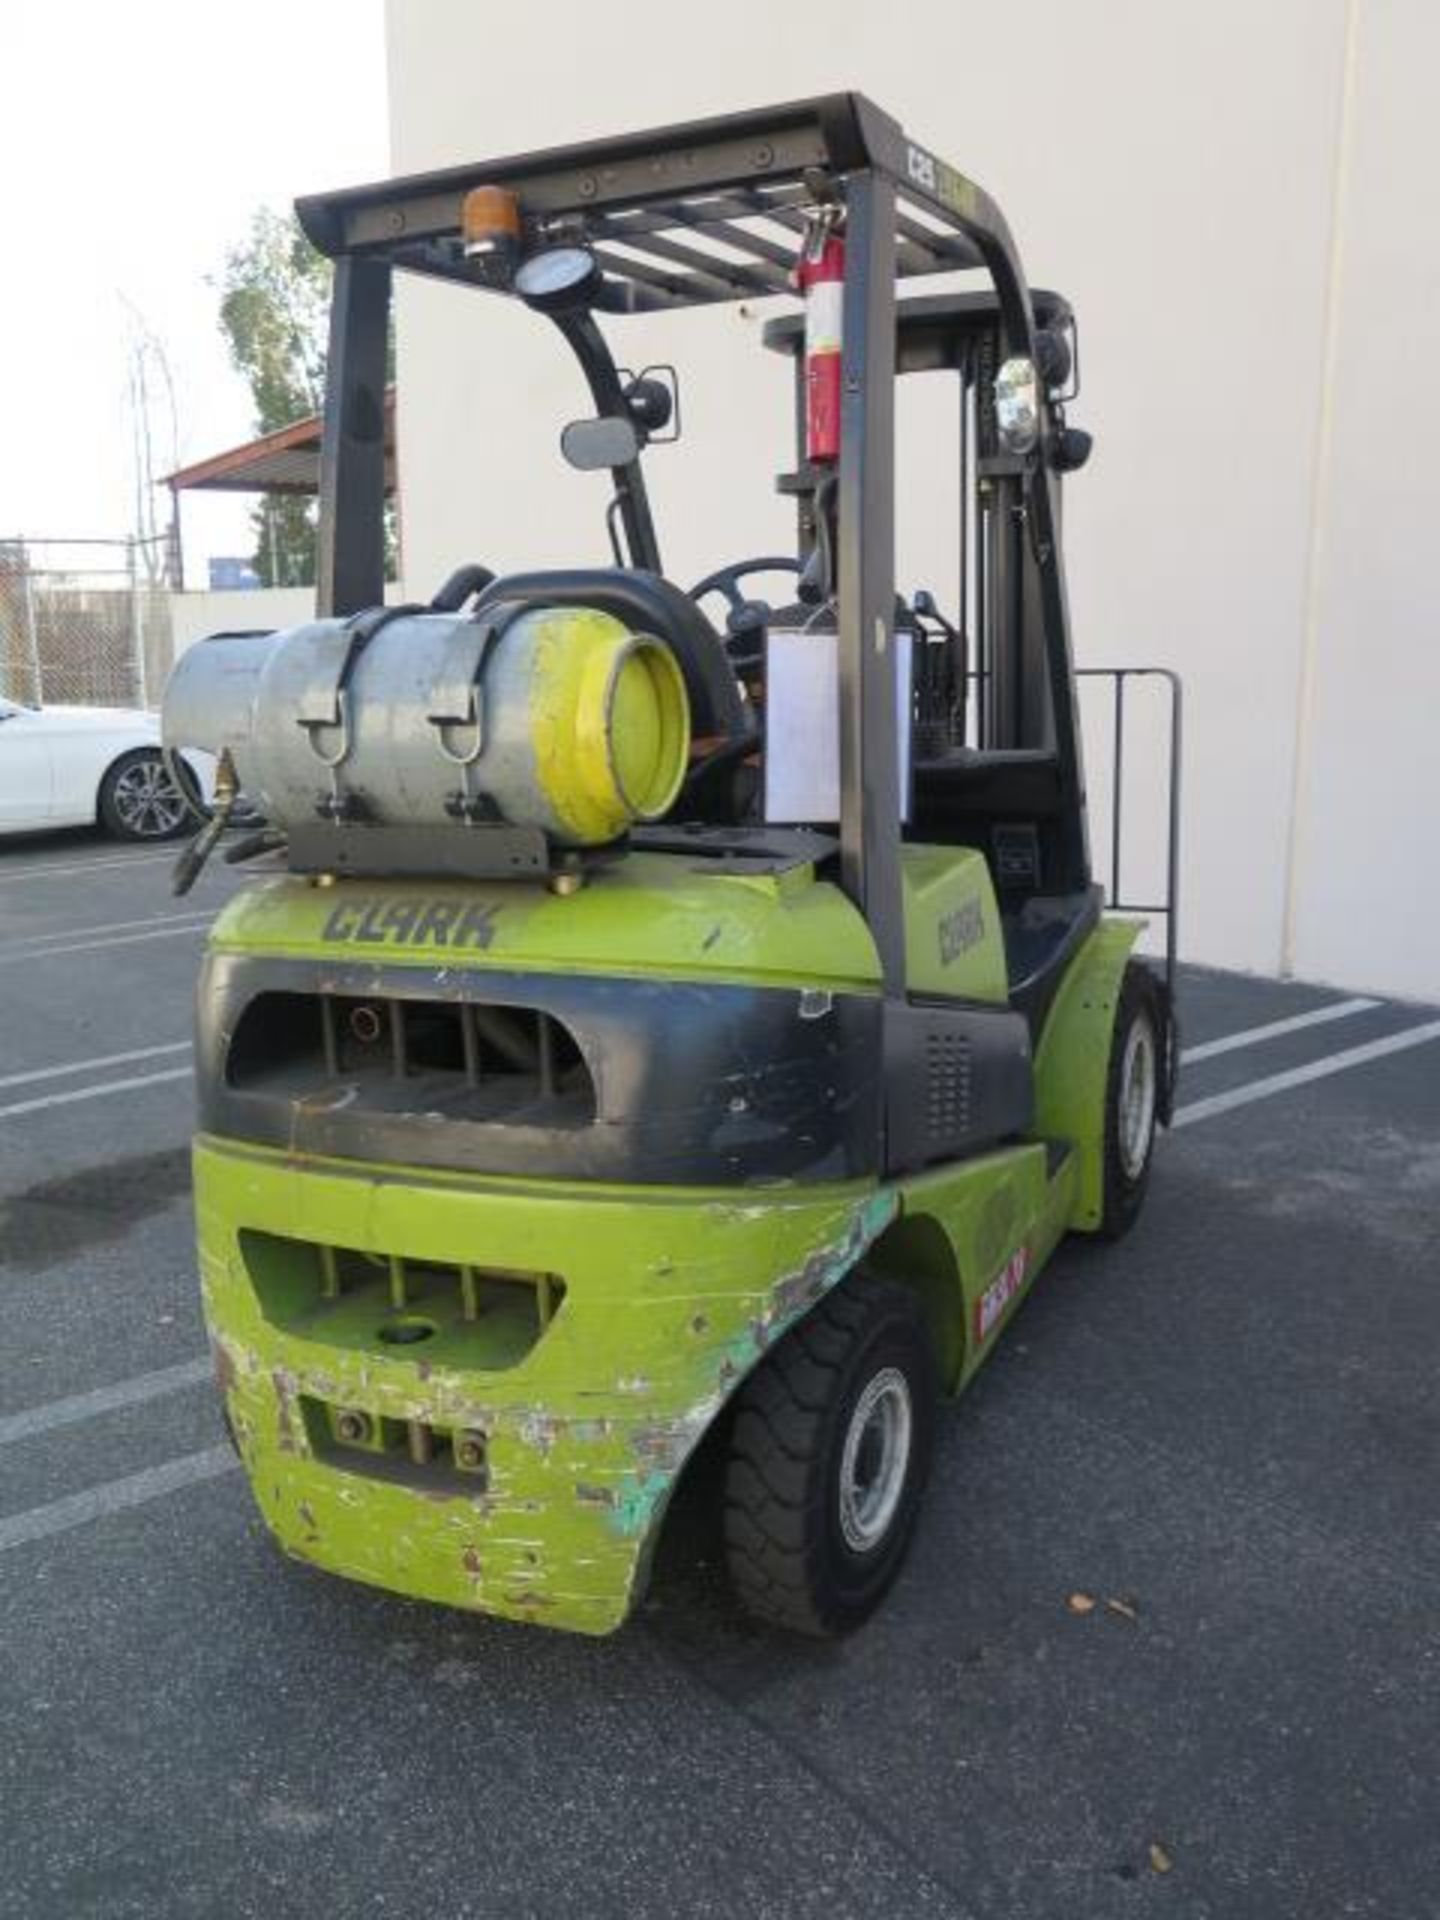 Clark C25 5000 Lb LPG Forklift s/n P-2321-0460-9862CNF w/ 3-Stage, 189" Lift, Side Shift, SOLD AS IS - Image 3 of 18